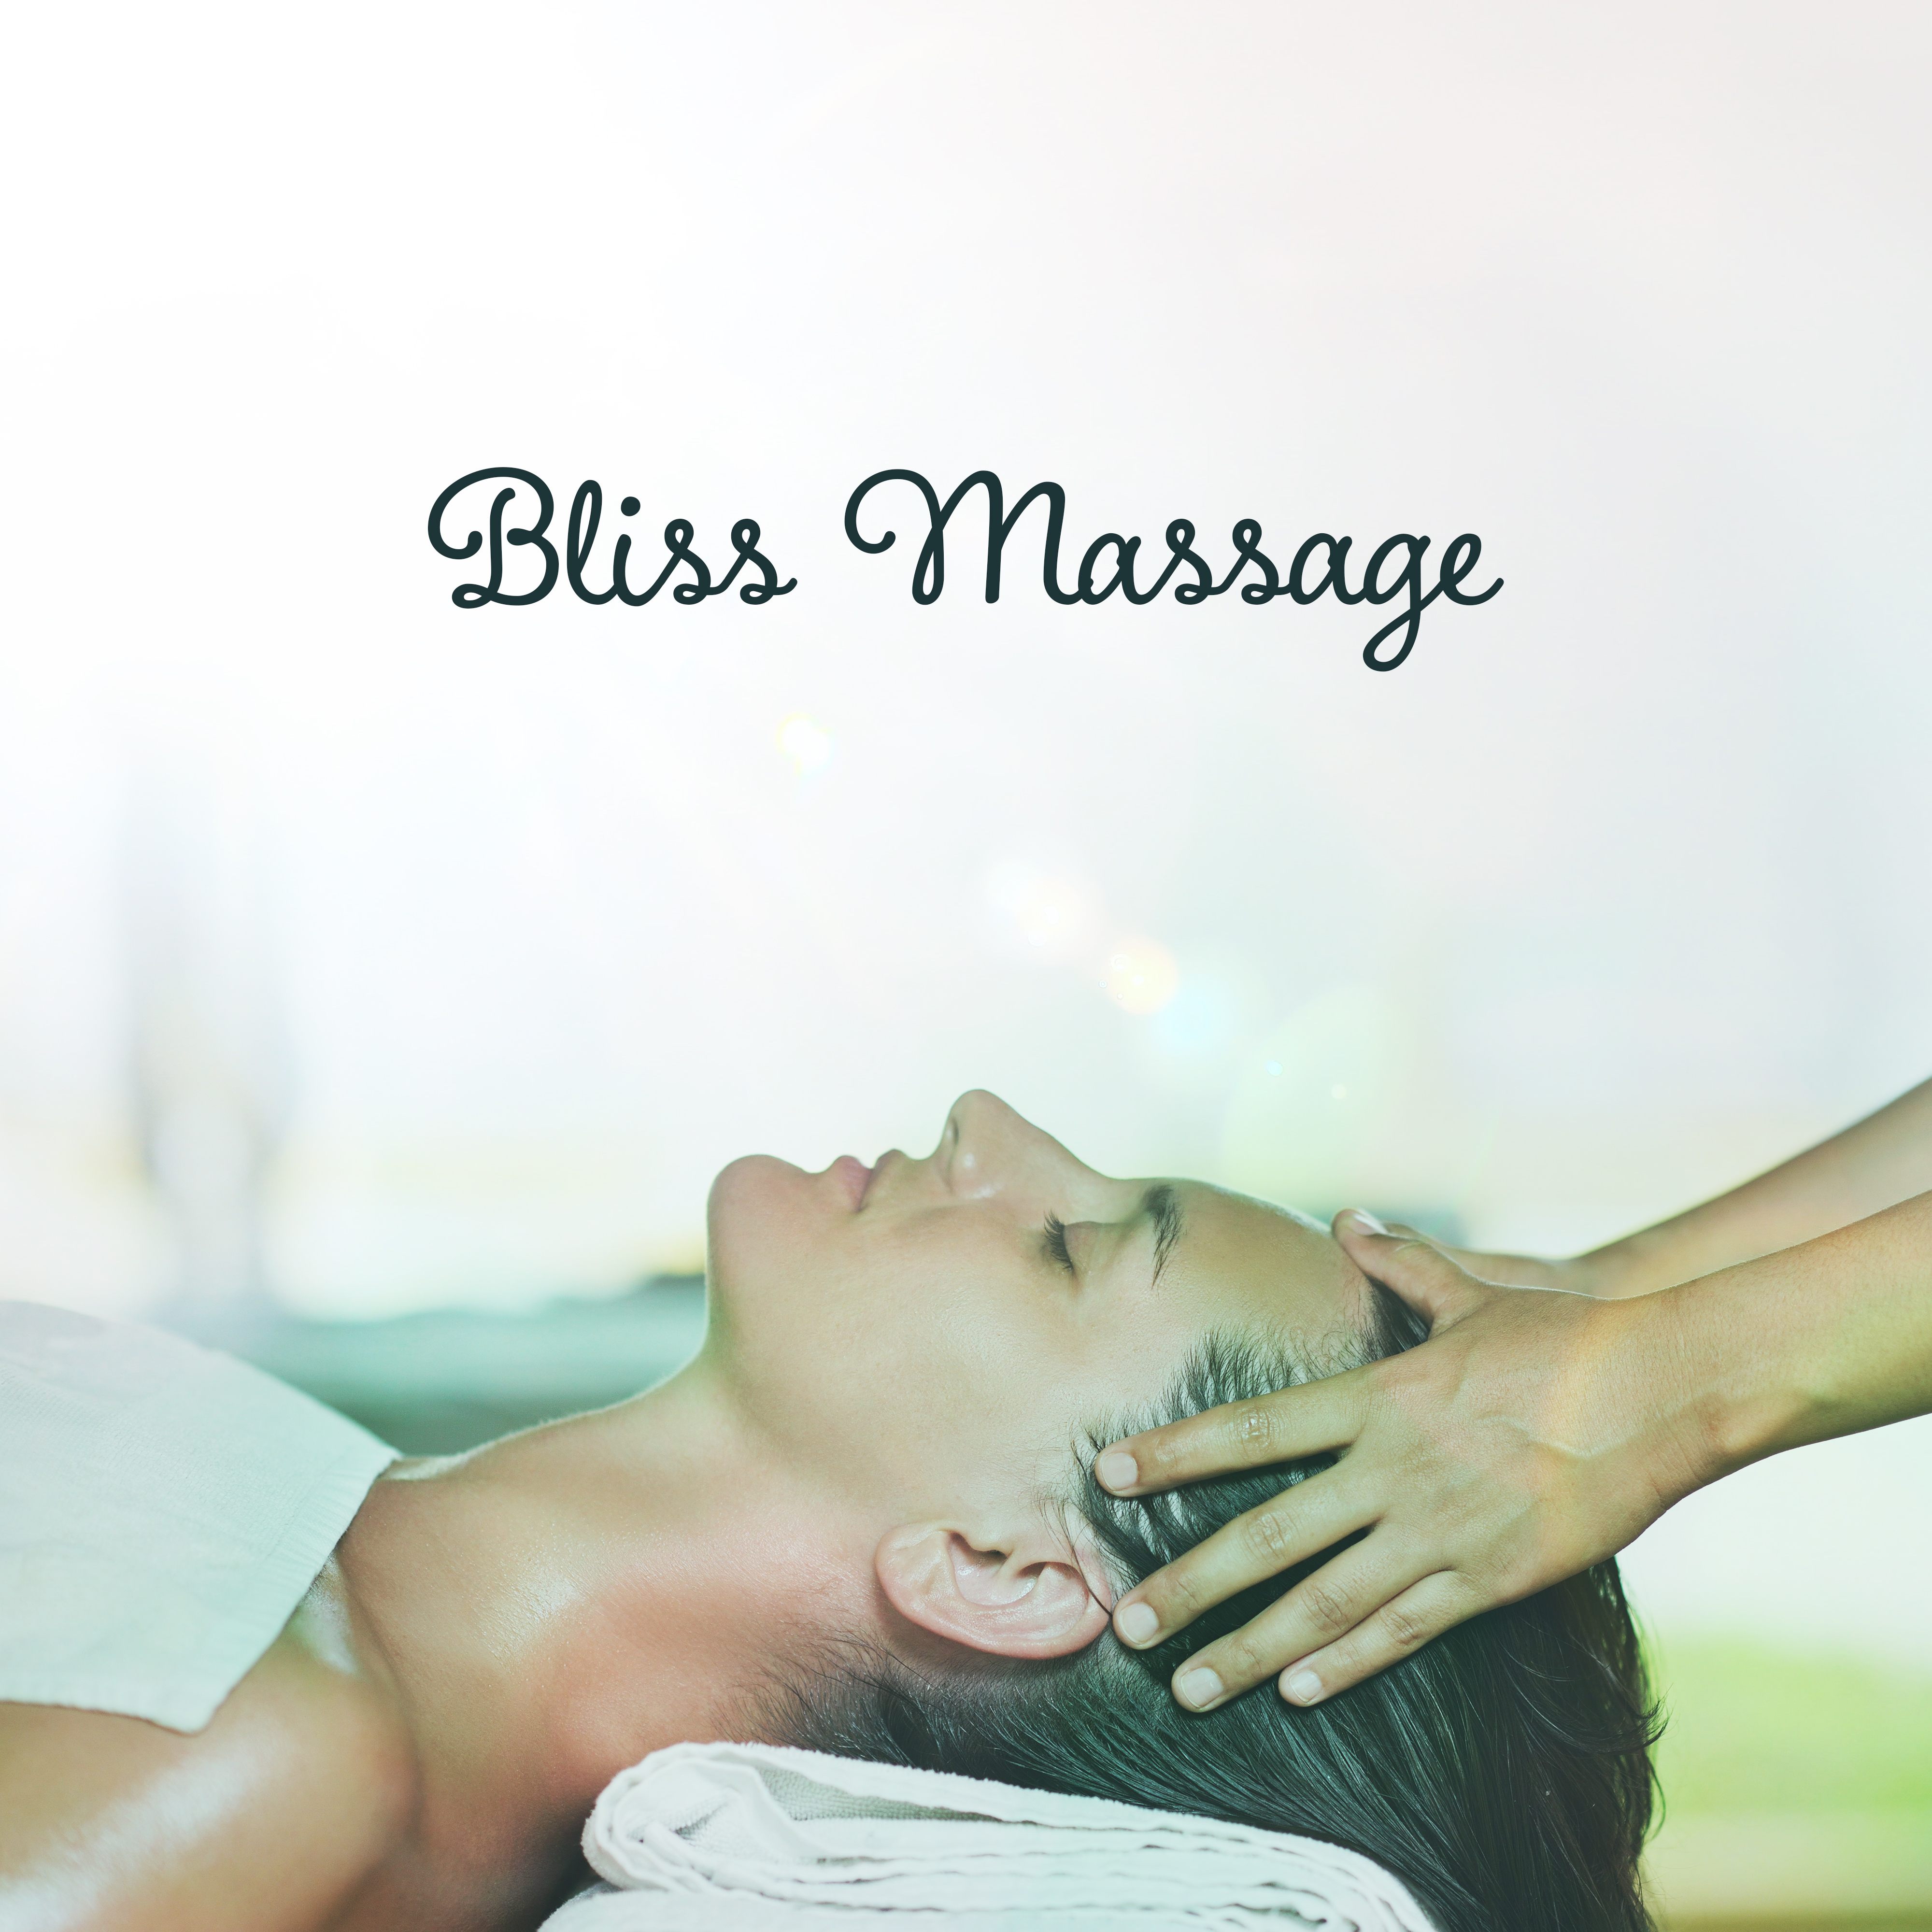 Bliss Massage – Peaceful Sounds of Nature, Music for Hotel Spa, Beauty Parlour, Spa at Home, Relax